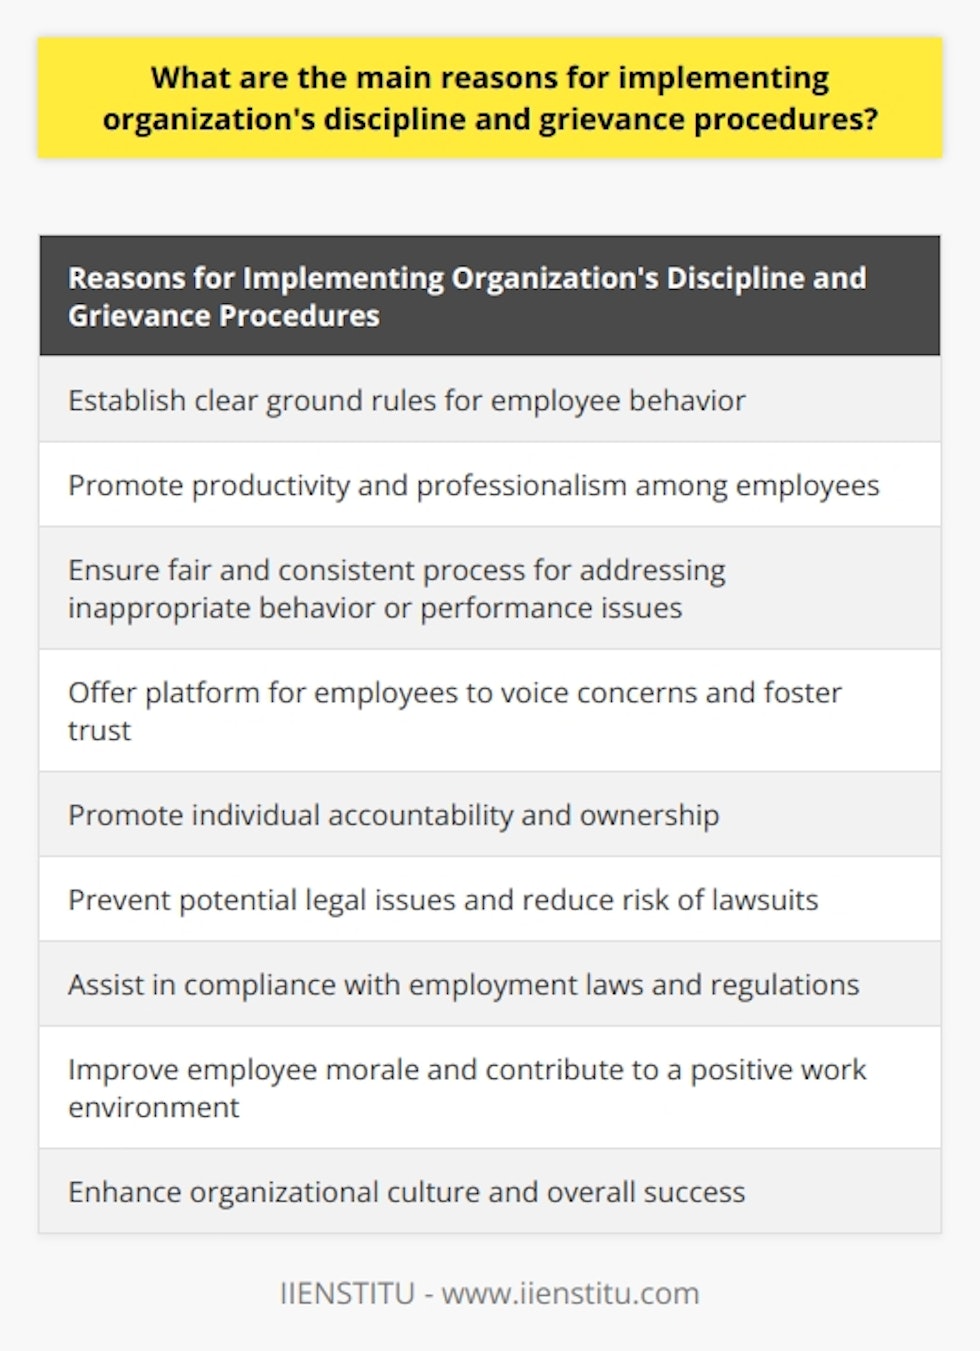 Implementing an organization's discipline and grievance procedures is crucial for several reasons. Firstly, it helps establish ground rules for employee behavior, creating a stable work environment with clear expectations. This promotes productivity and professionalism among employees. The procedures outline which actions are unacceptable and the consequences for engaging in such behavior.Secondly, discipline procedures ensure that there is a fair and consistent process for addressing inappropriate behavior or performance issues. By standardizing the way in which disciplinary actions are carried out, employees are treated fairly and equally. Similarly, grievance procedures provide employees with a platform to voice their concerns, fostering a sense of fairness and trust between employees and management.Moreover, organization's discipline and grievance procedures promote individual accountability. Employees are made aware of the expectations surrounding their performance, behavior, and conduct, creating a culture of responsibility and ownership. This accountability benefits both the organization and its employees by ensuring that everyone is accountable for their actions.Implementing these procedures also helps prevent potential legal issues. By having a well-established discipline and grievance system, organizations can address disputes or violations in a structured manner, reducing the risk of lawsuits. Additionally, these procedures provide a framework for organizations to comply with relevant employment laws and regulations, further protecting the organization.Lastly, discipline and grievance procedures have a significant impact on employee morale. By providing channels for addressing concerns and upholding consistency in enforcing behavioral expectations, these policies contribute to a positive work environment. Employees who feel heard, respected, and treated fairly are more likely to be engaged, motivated, and satisfied with their jobs. This, in turn, contributes to a healthier organizational culture and overall success.In summary, implementing an organization's discipline and grievance procedures serves various important purposes, including establishing clear expectations, promoting fairness, fostering accountability, preventing legal issues, and enhancing employee morale. These procedures contribute to a professional, stable, and healthy work environment, ultimately benefiting the organization as a whole.